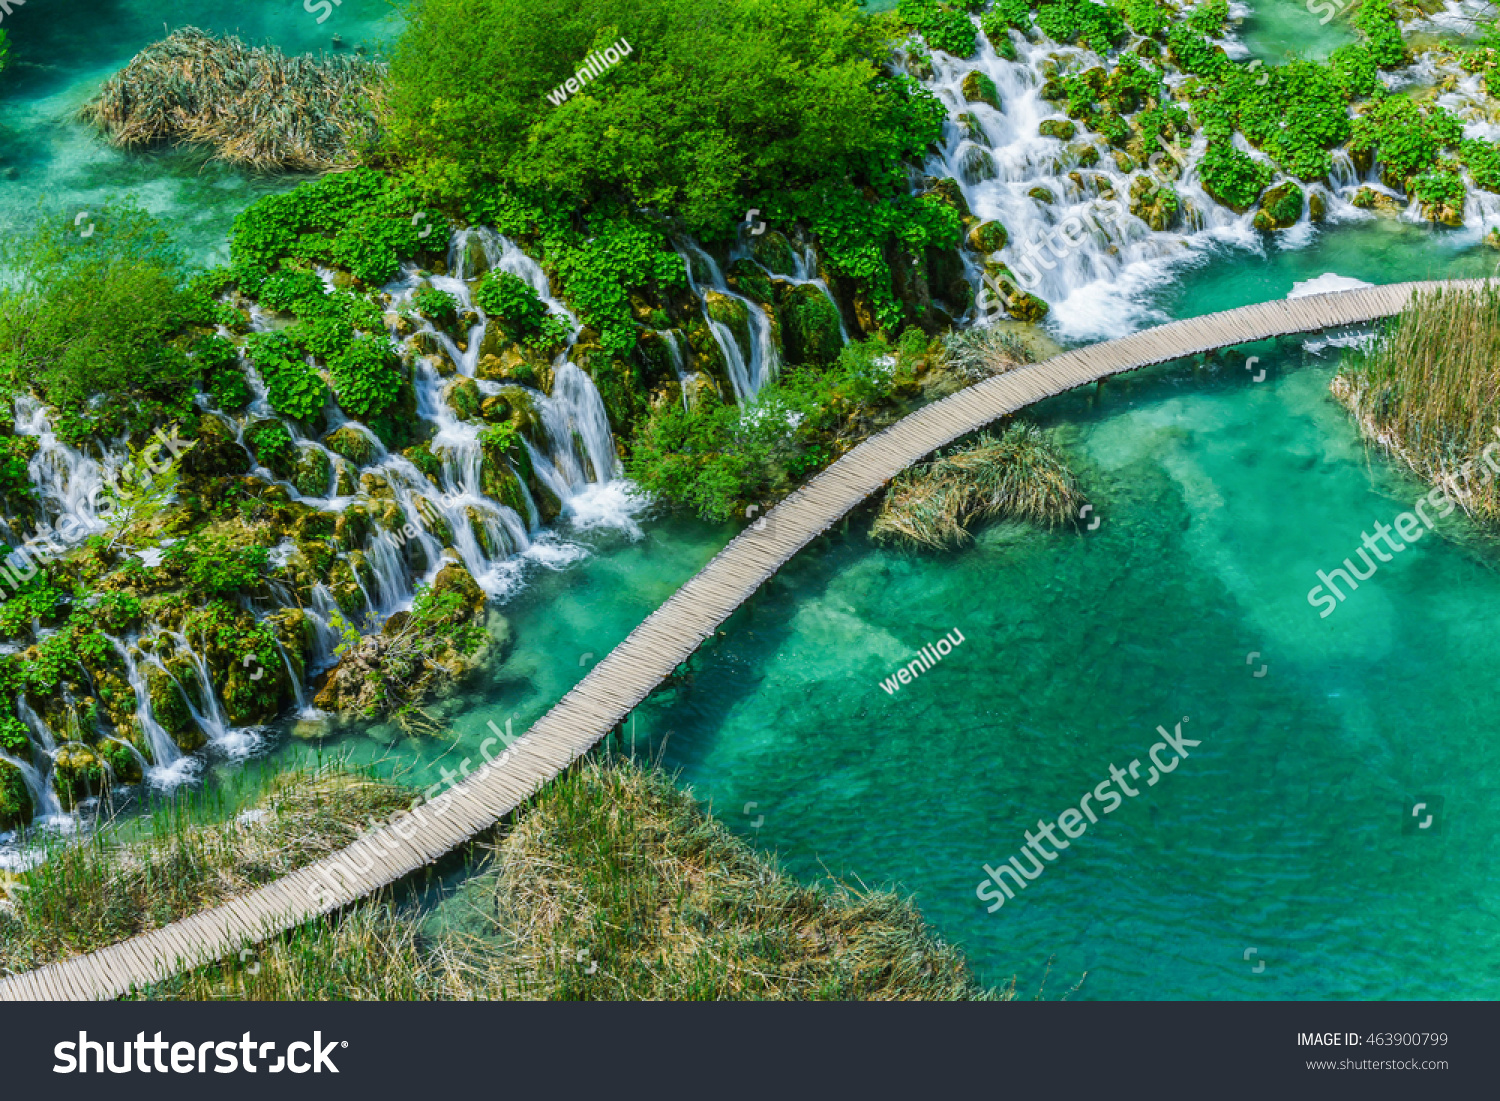 Lakes of The Plitvice Lakes National Park in Croatia #463900799